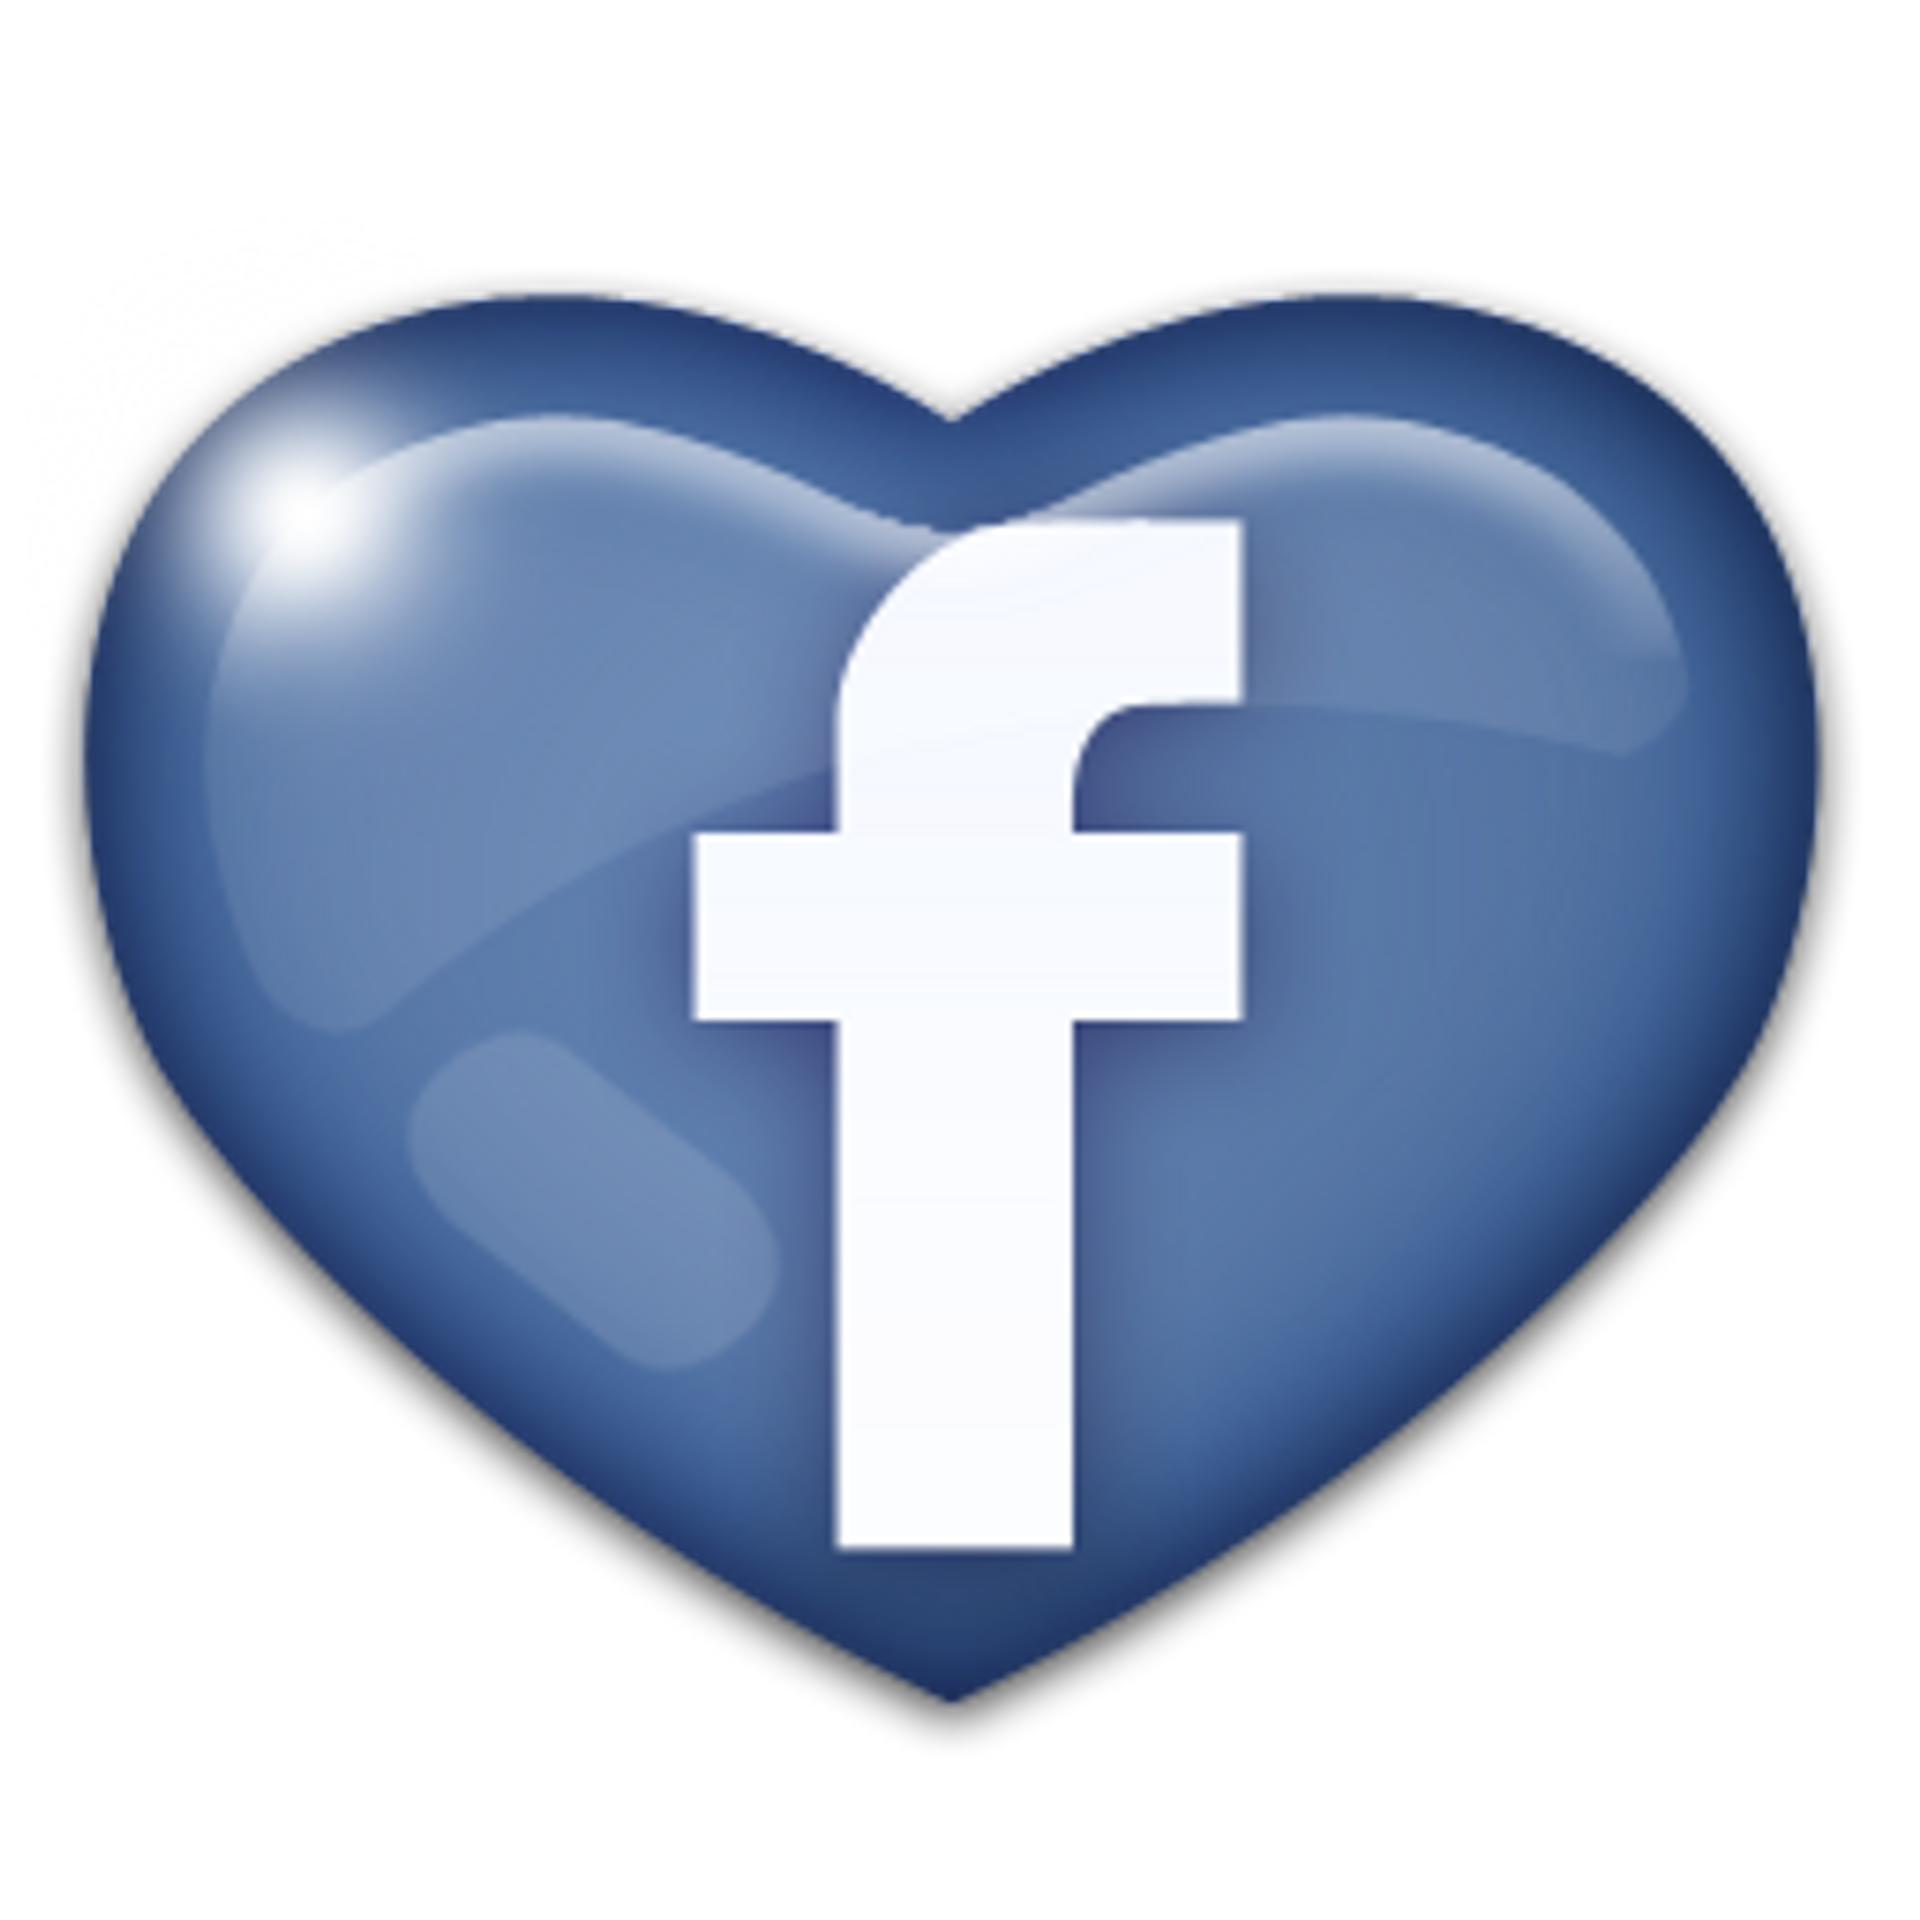 kisspng-facebook-animation-computer-icons-like-button-5af6442d7747a1.8178166915260887494886.png